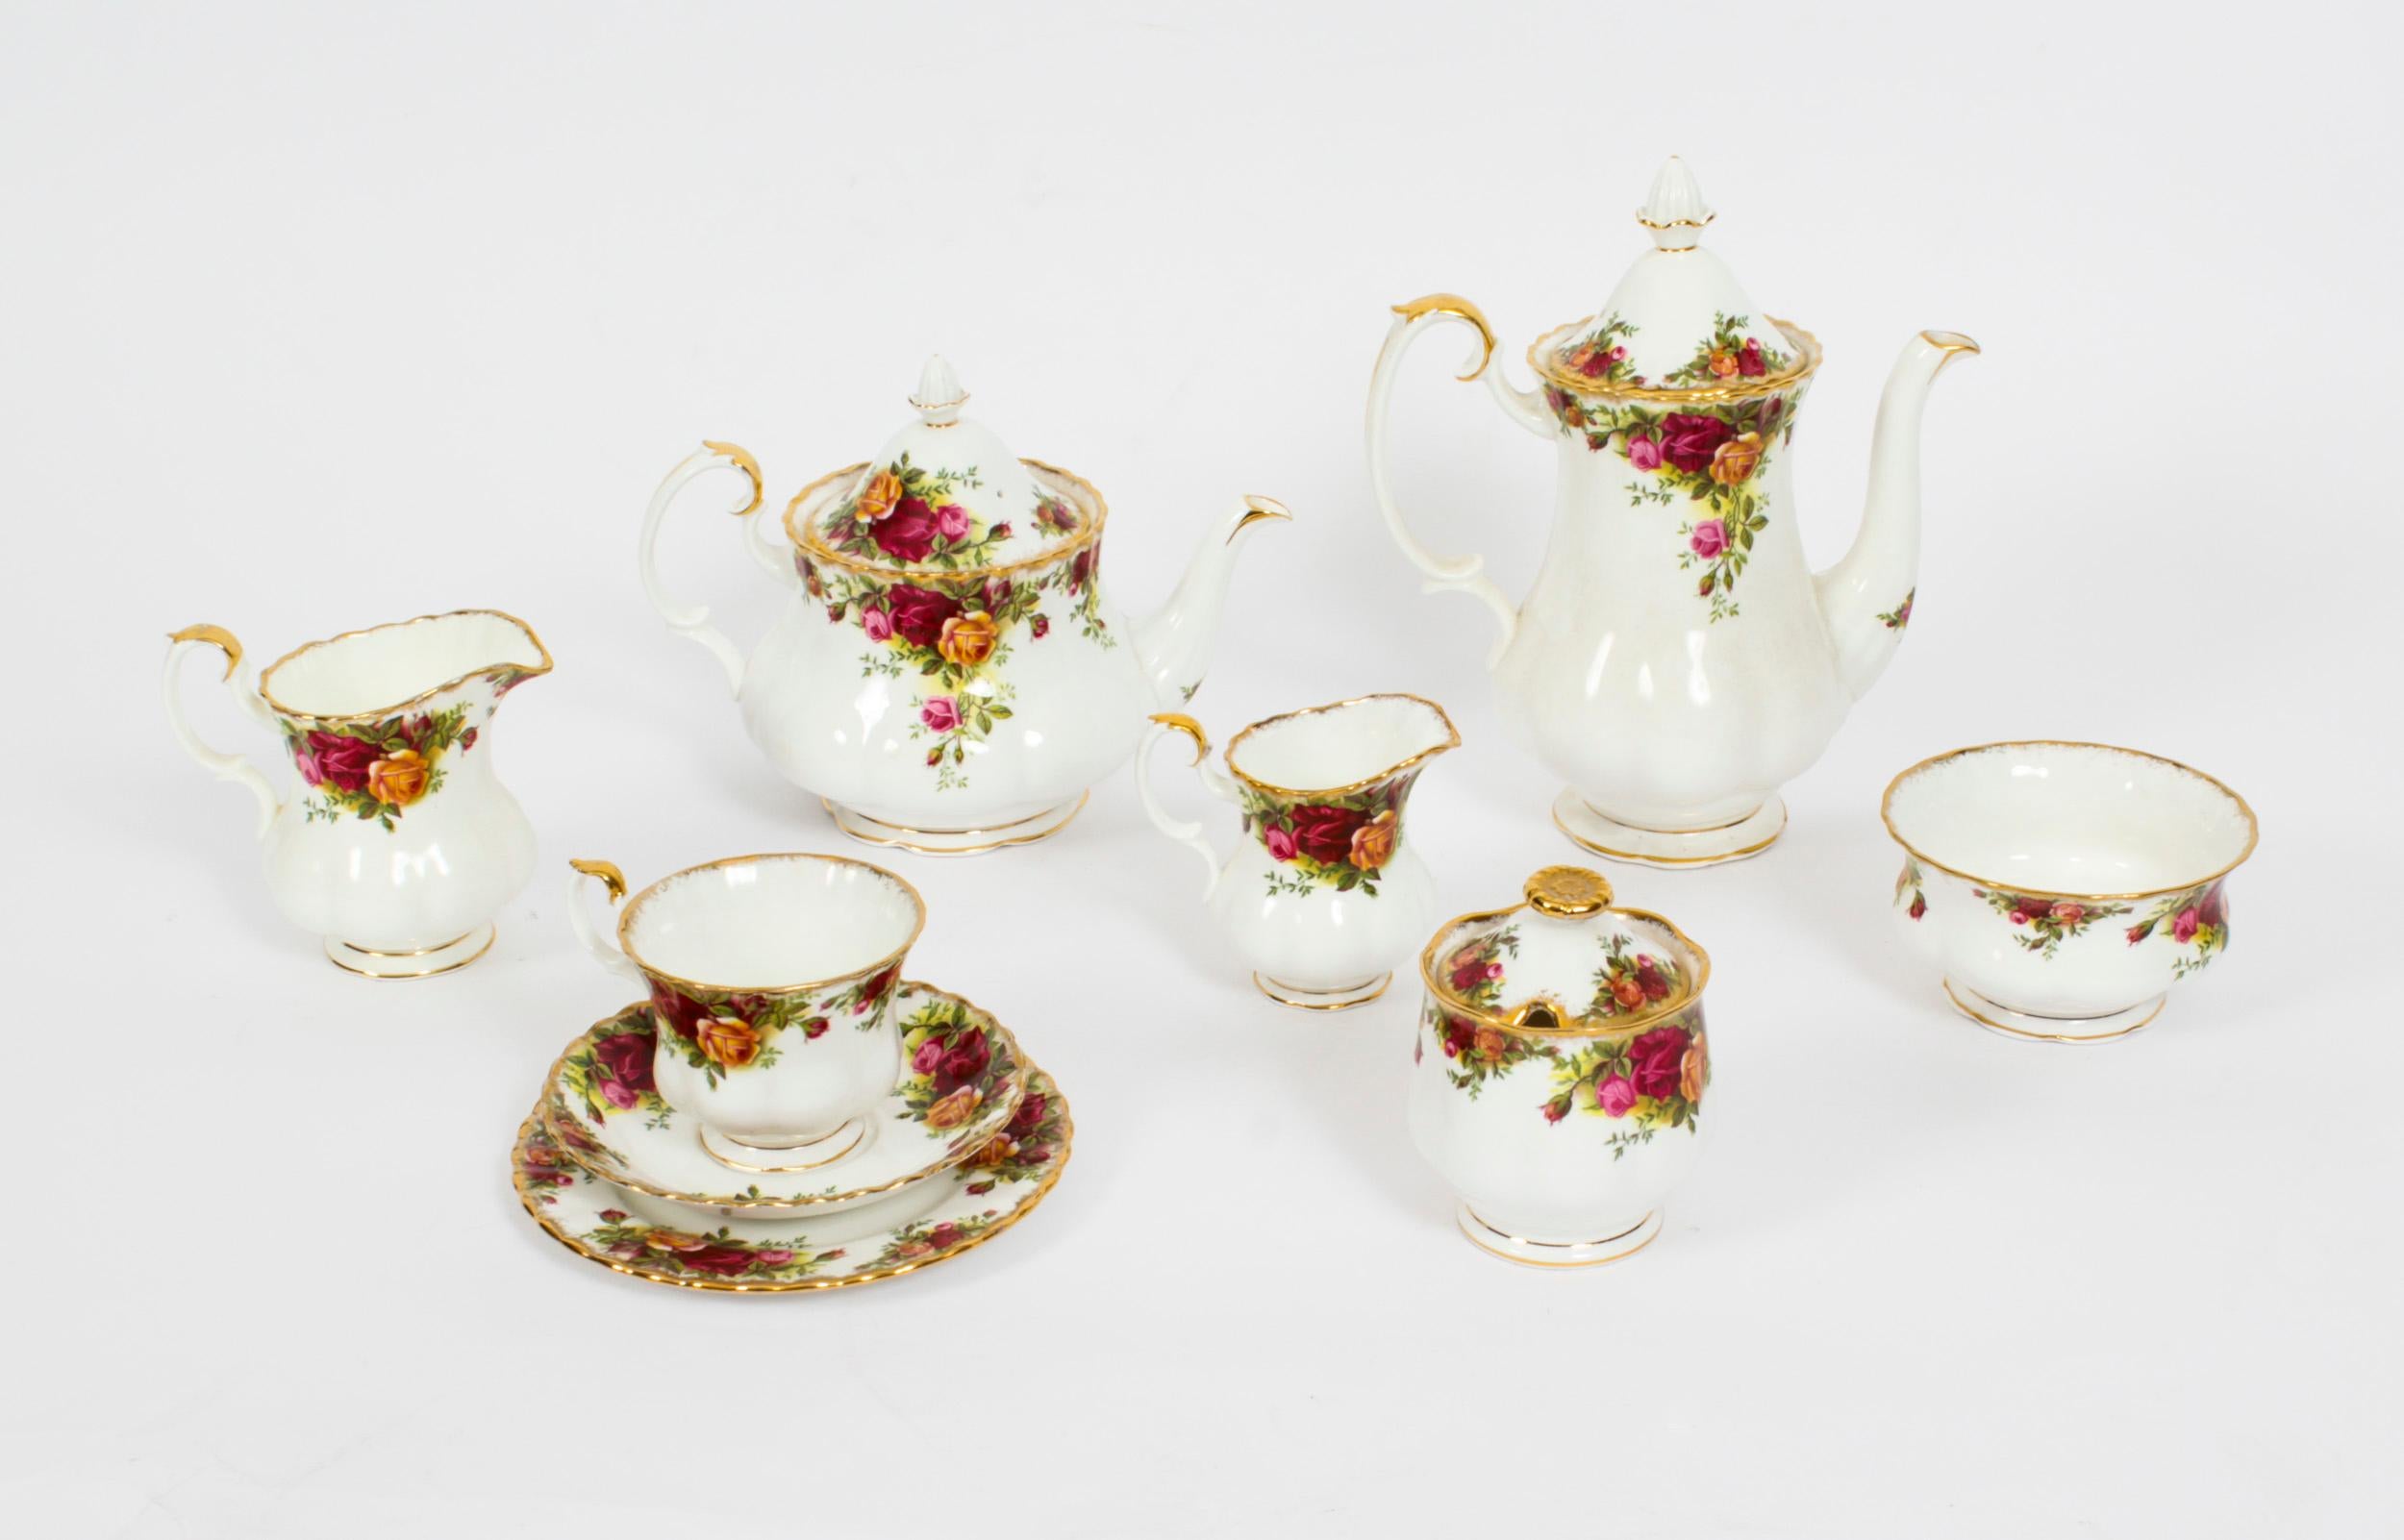 This is a wonderful vintage 50 piece tea, coffee service by Royal Albert China, the design is called Old Country Roses, Circa 1960 in date.

It is beautifully made of fine bone china porcelain with hand enamelled floral decoration.

There is no